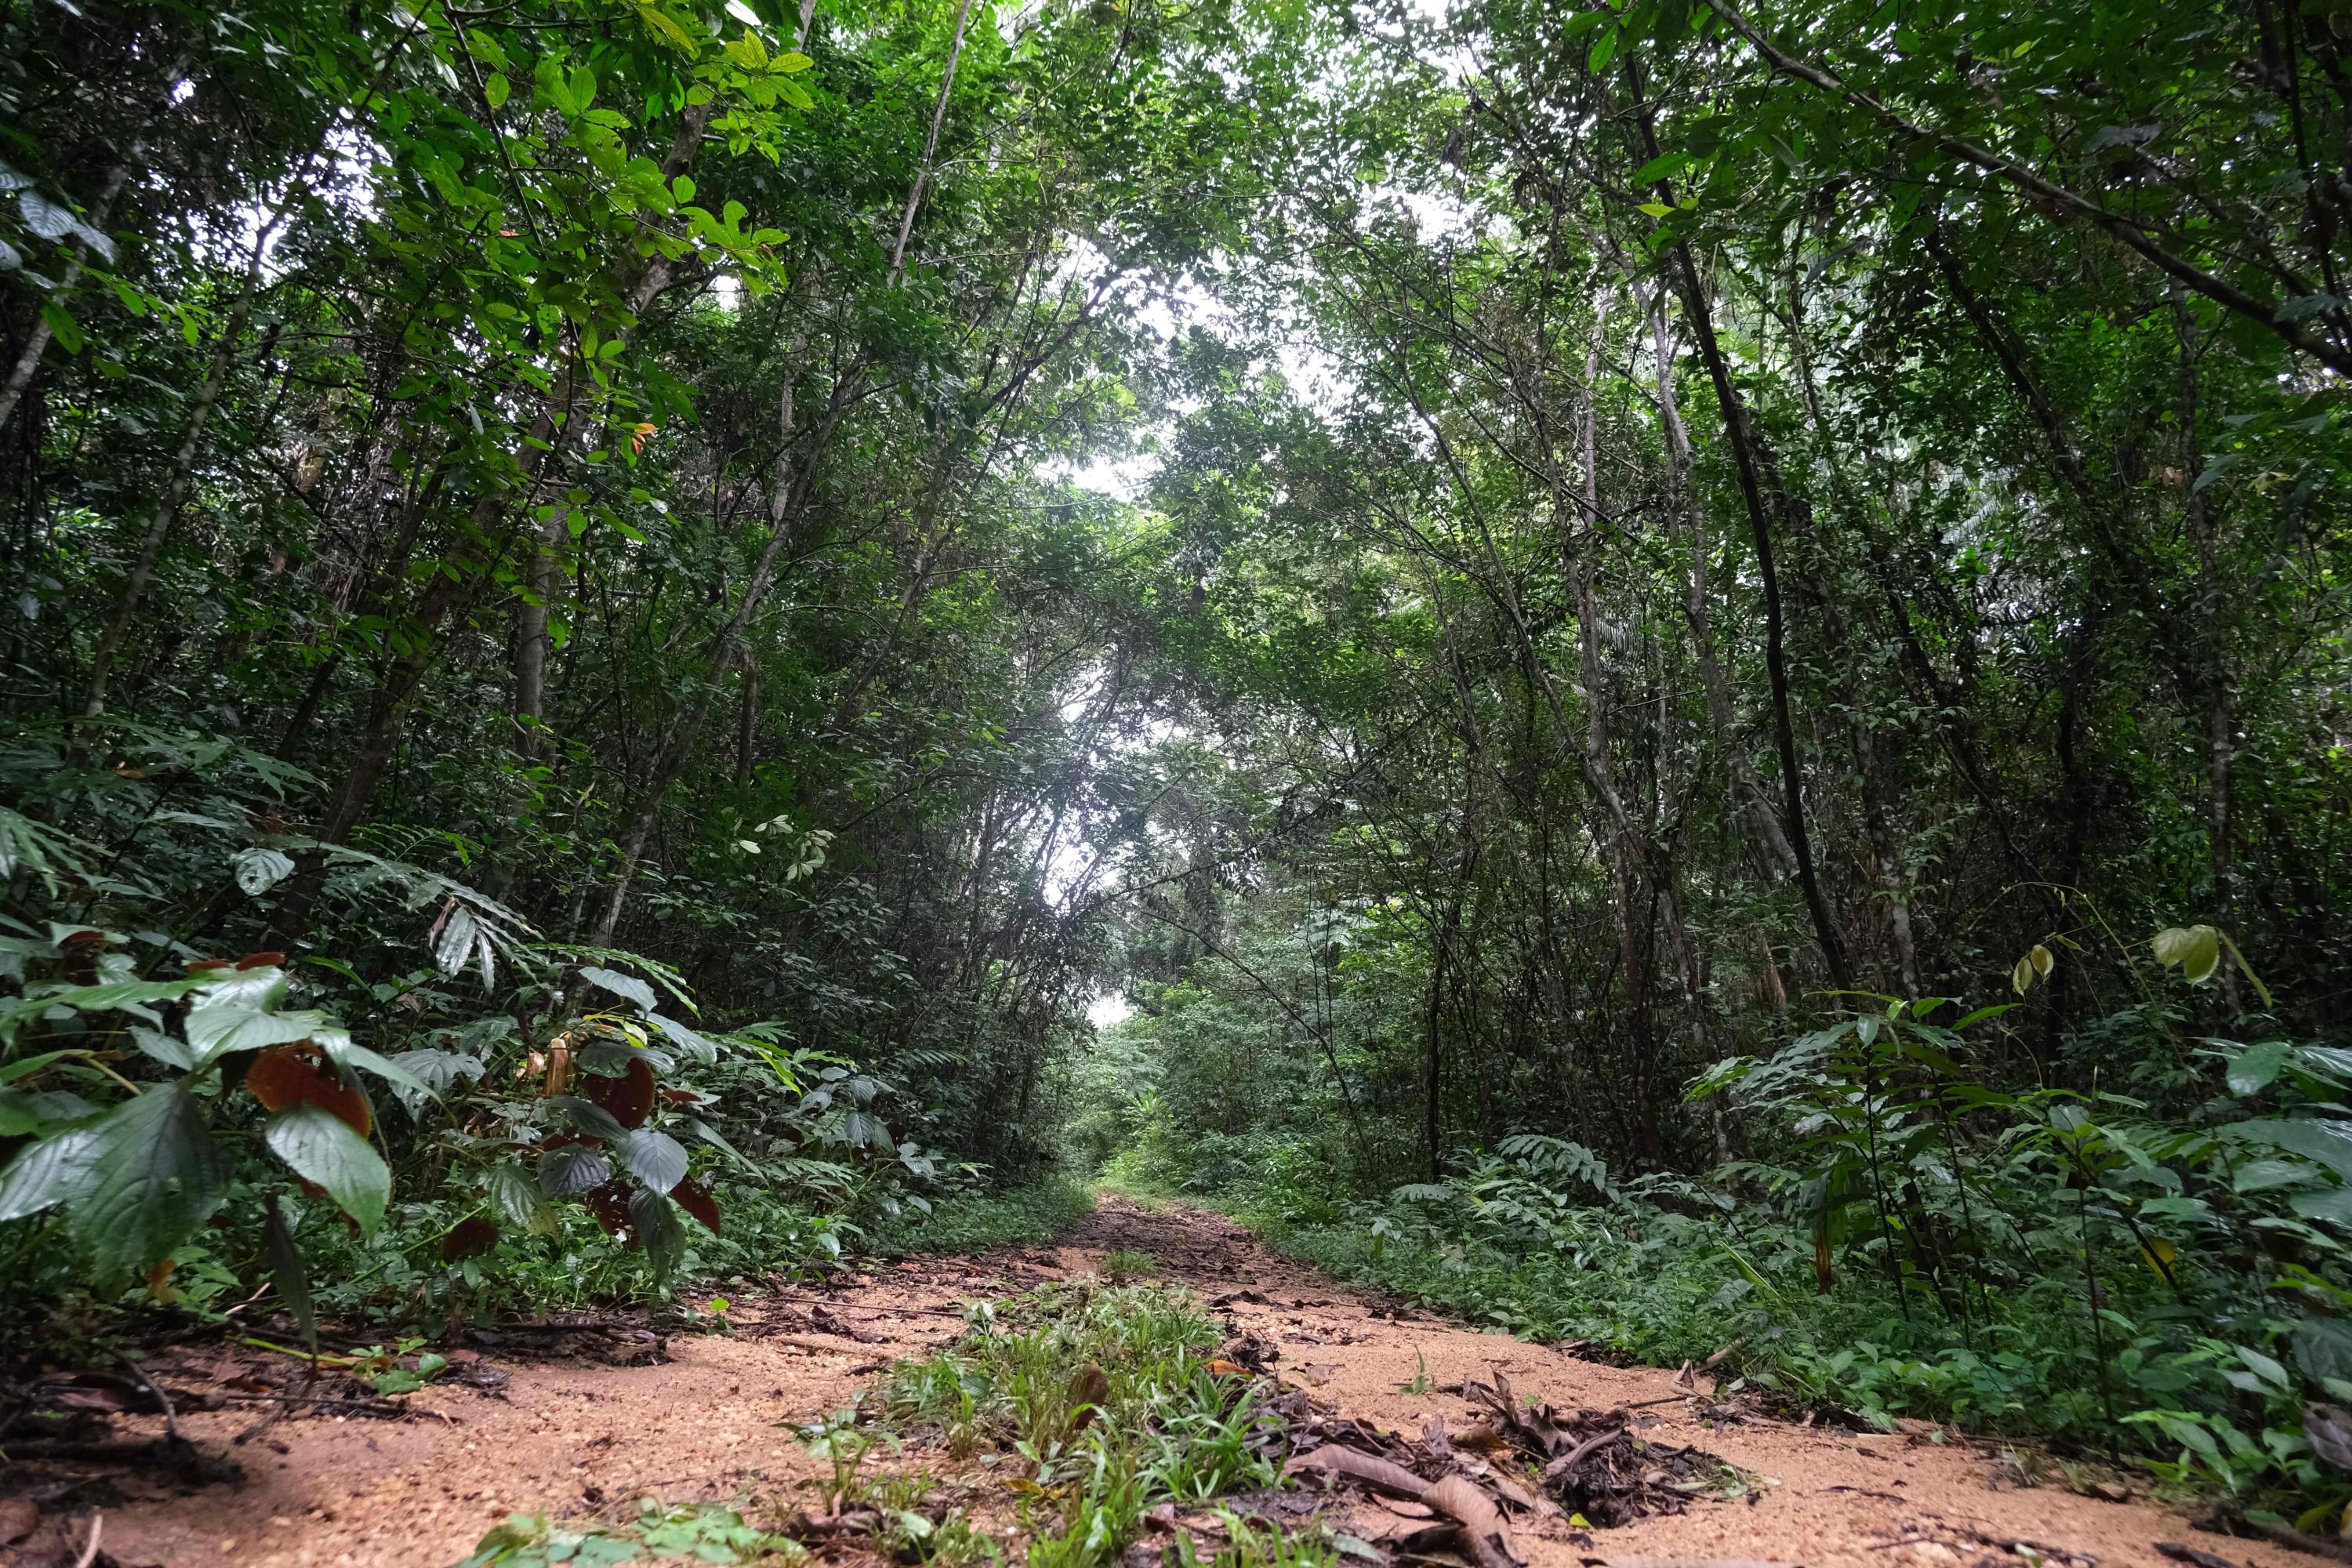 A general view of the Oban Biosphere Reserve, in Calabar, Cross River, Nigeria, where UNESCO chief Audrey Azoulay visited during a tour of the Reserve on Sept. 12, 2021. (AFP Photo)